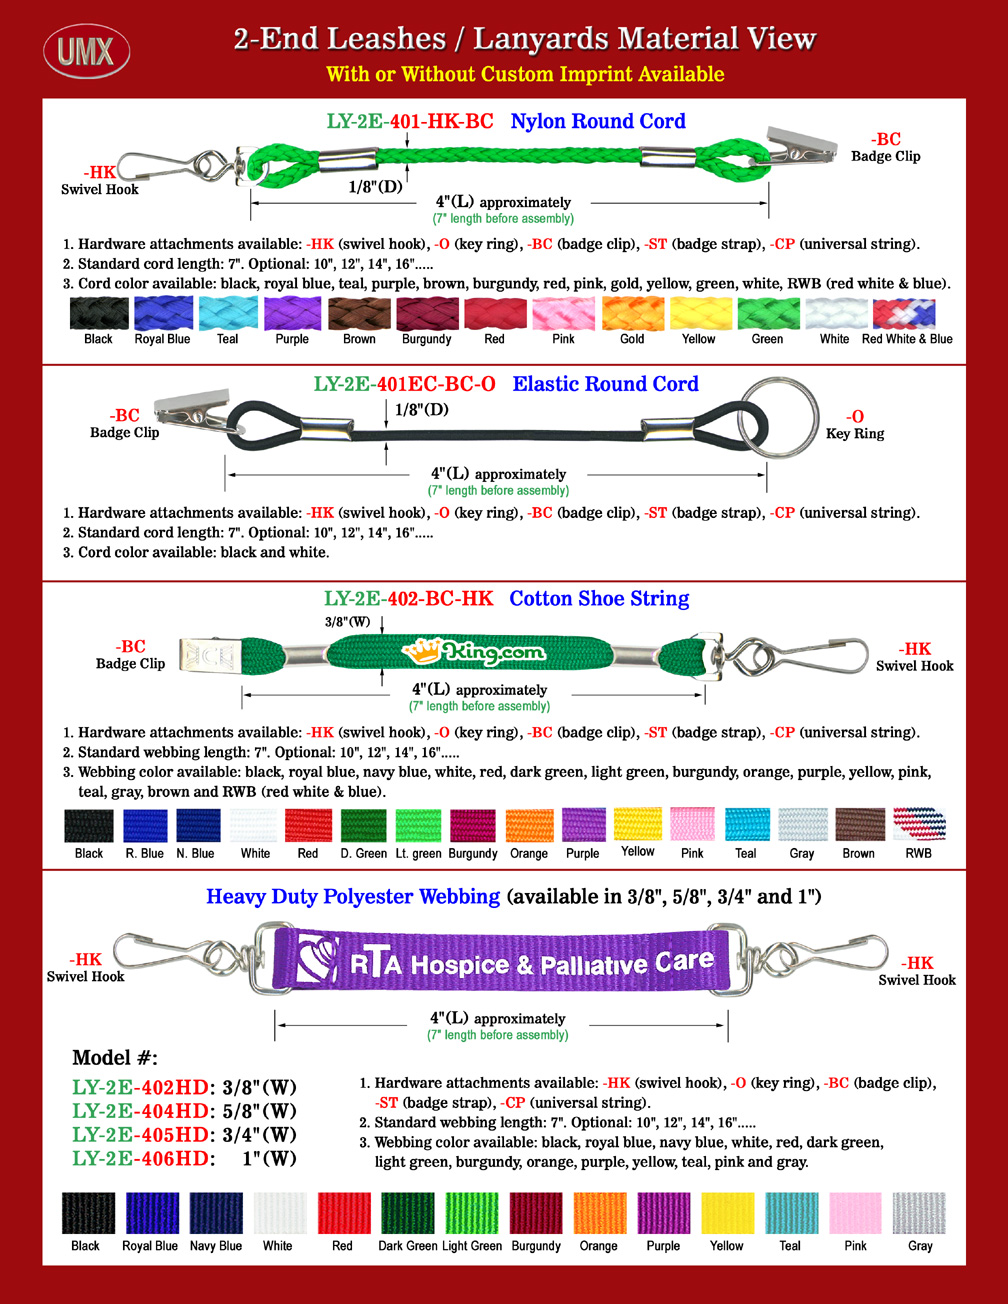 2-End Leashes or Lanyards: General Features About Material, Size, Length and Colors.